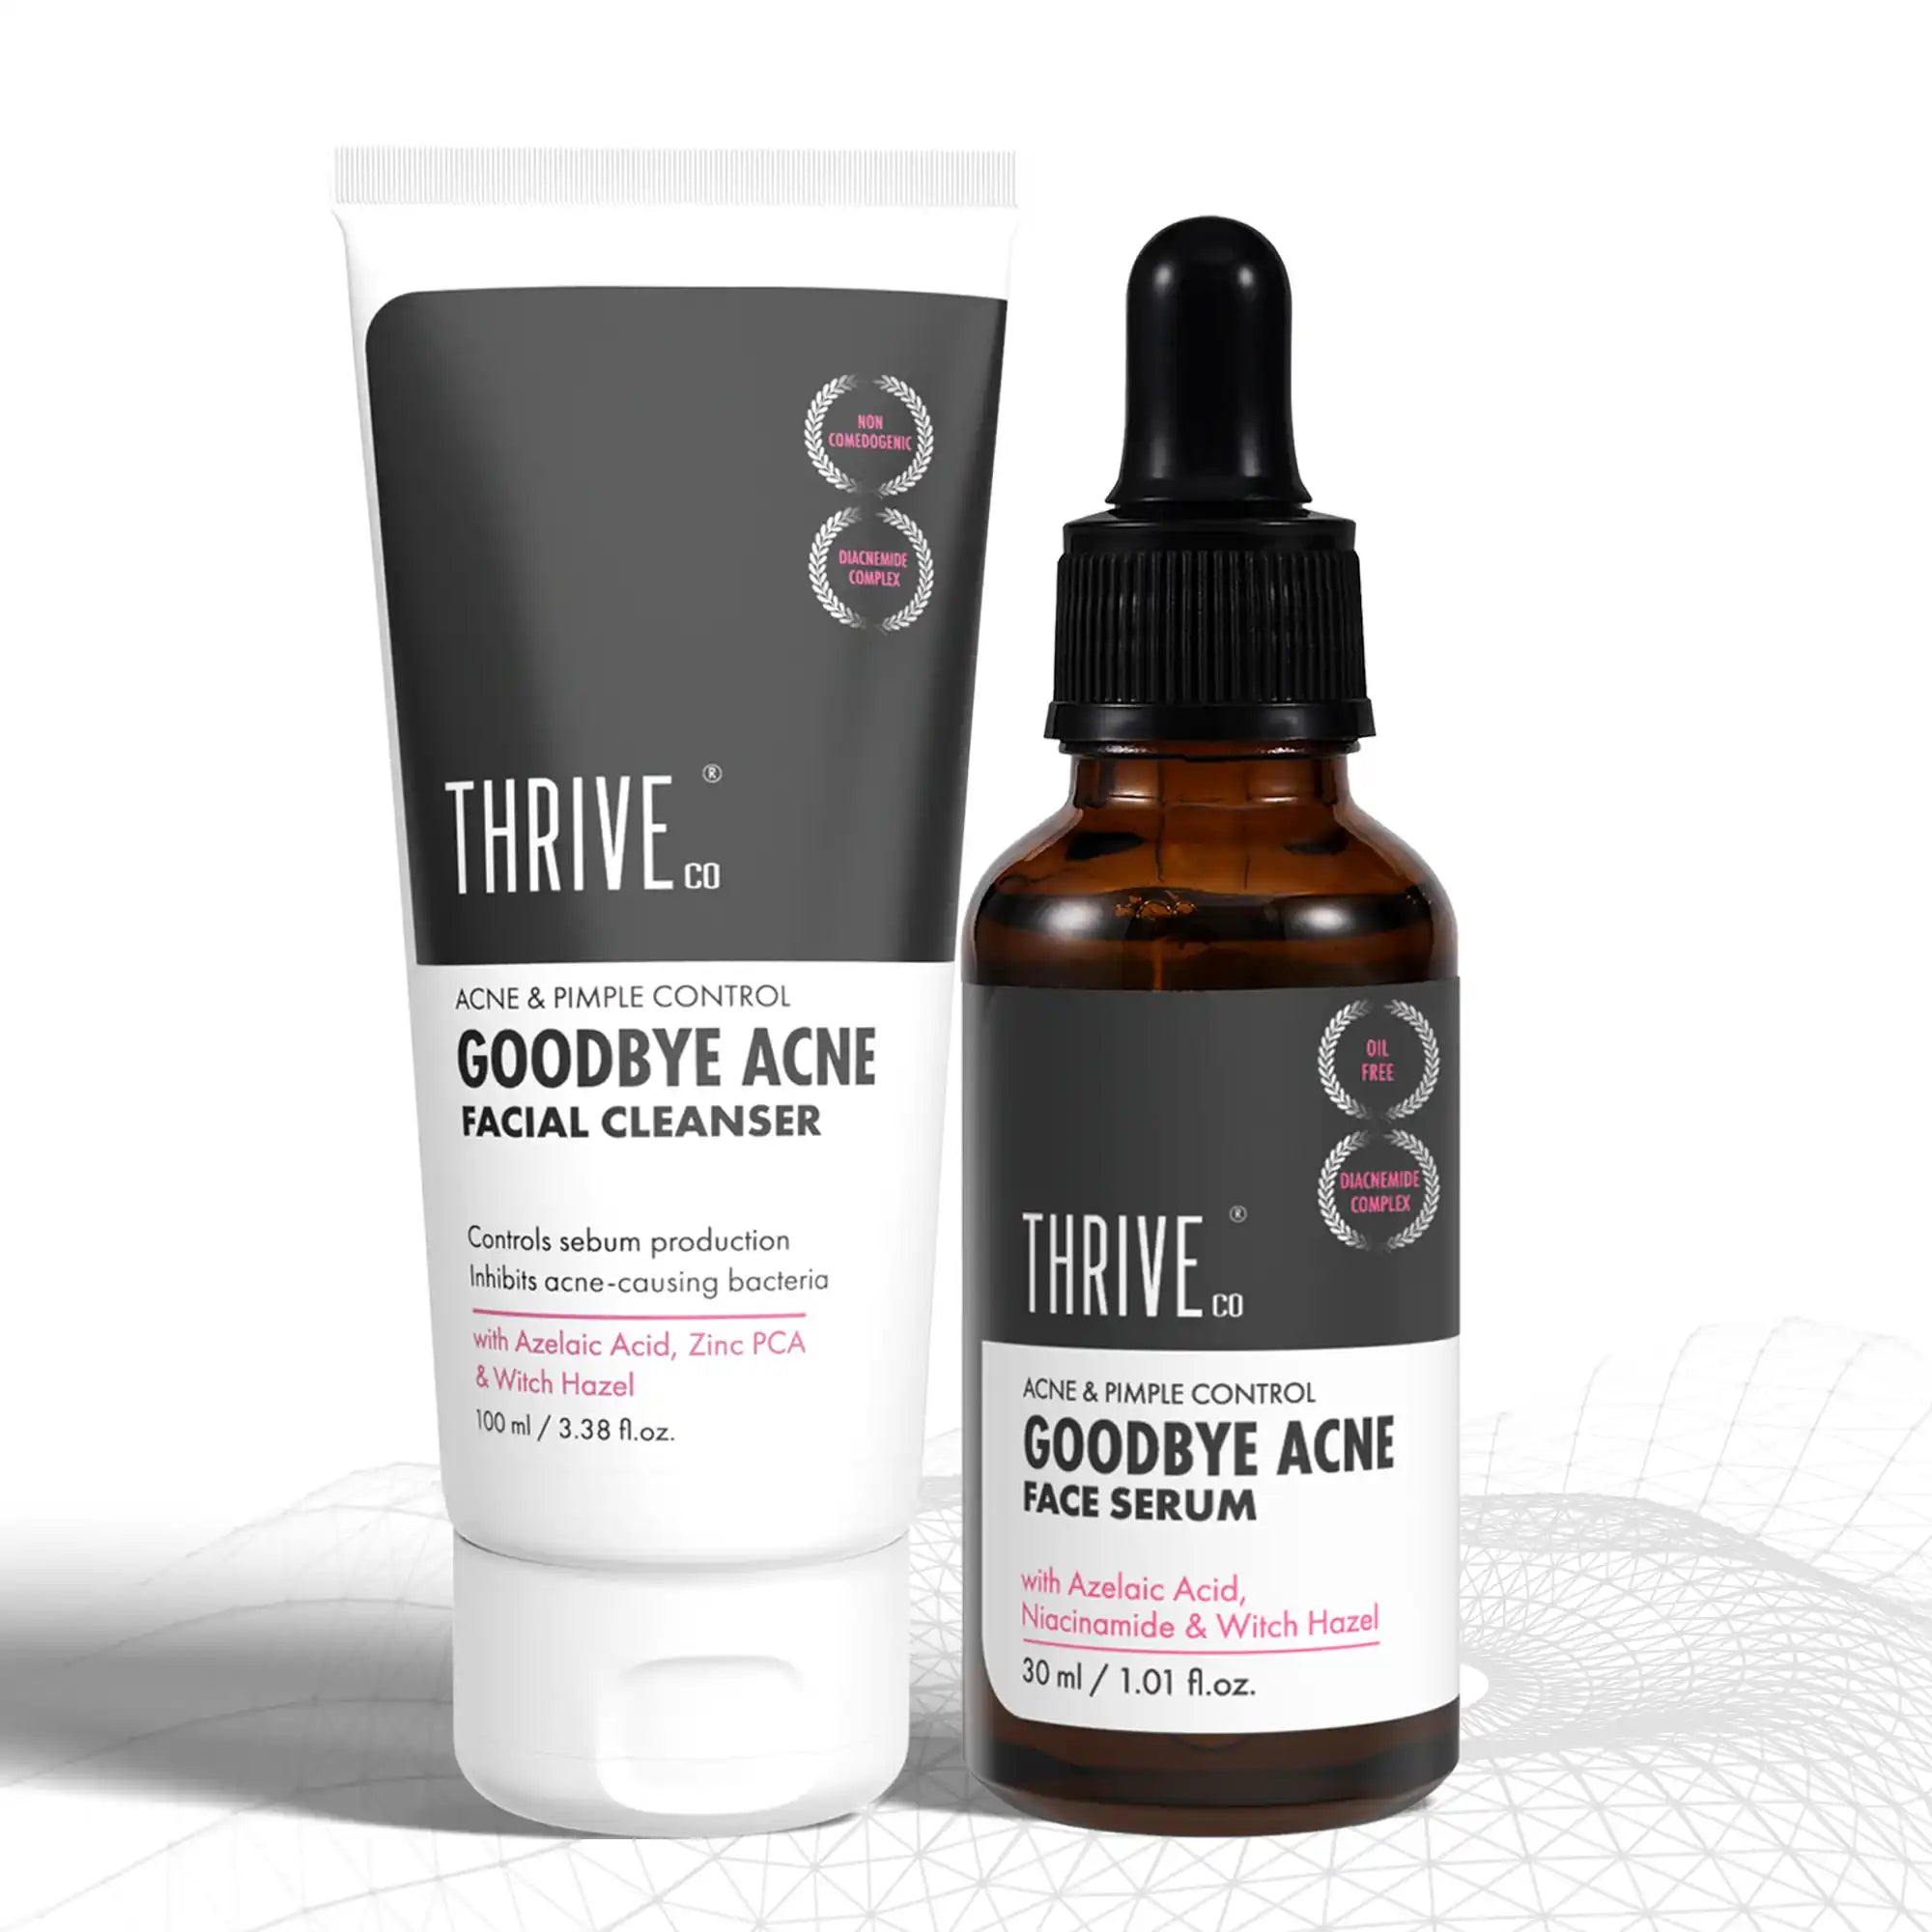 ThriveCo Mens Acne Kit for acne and pimple control